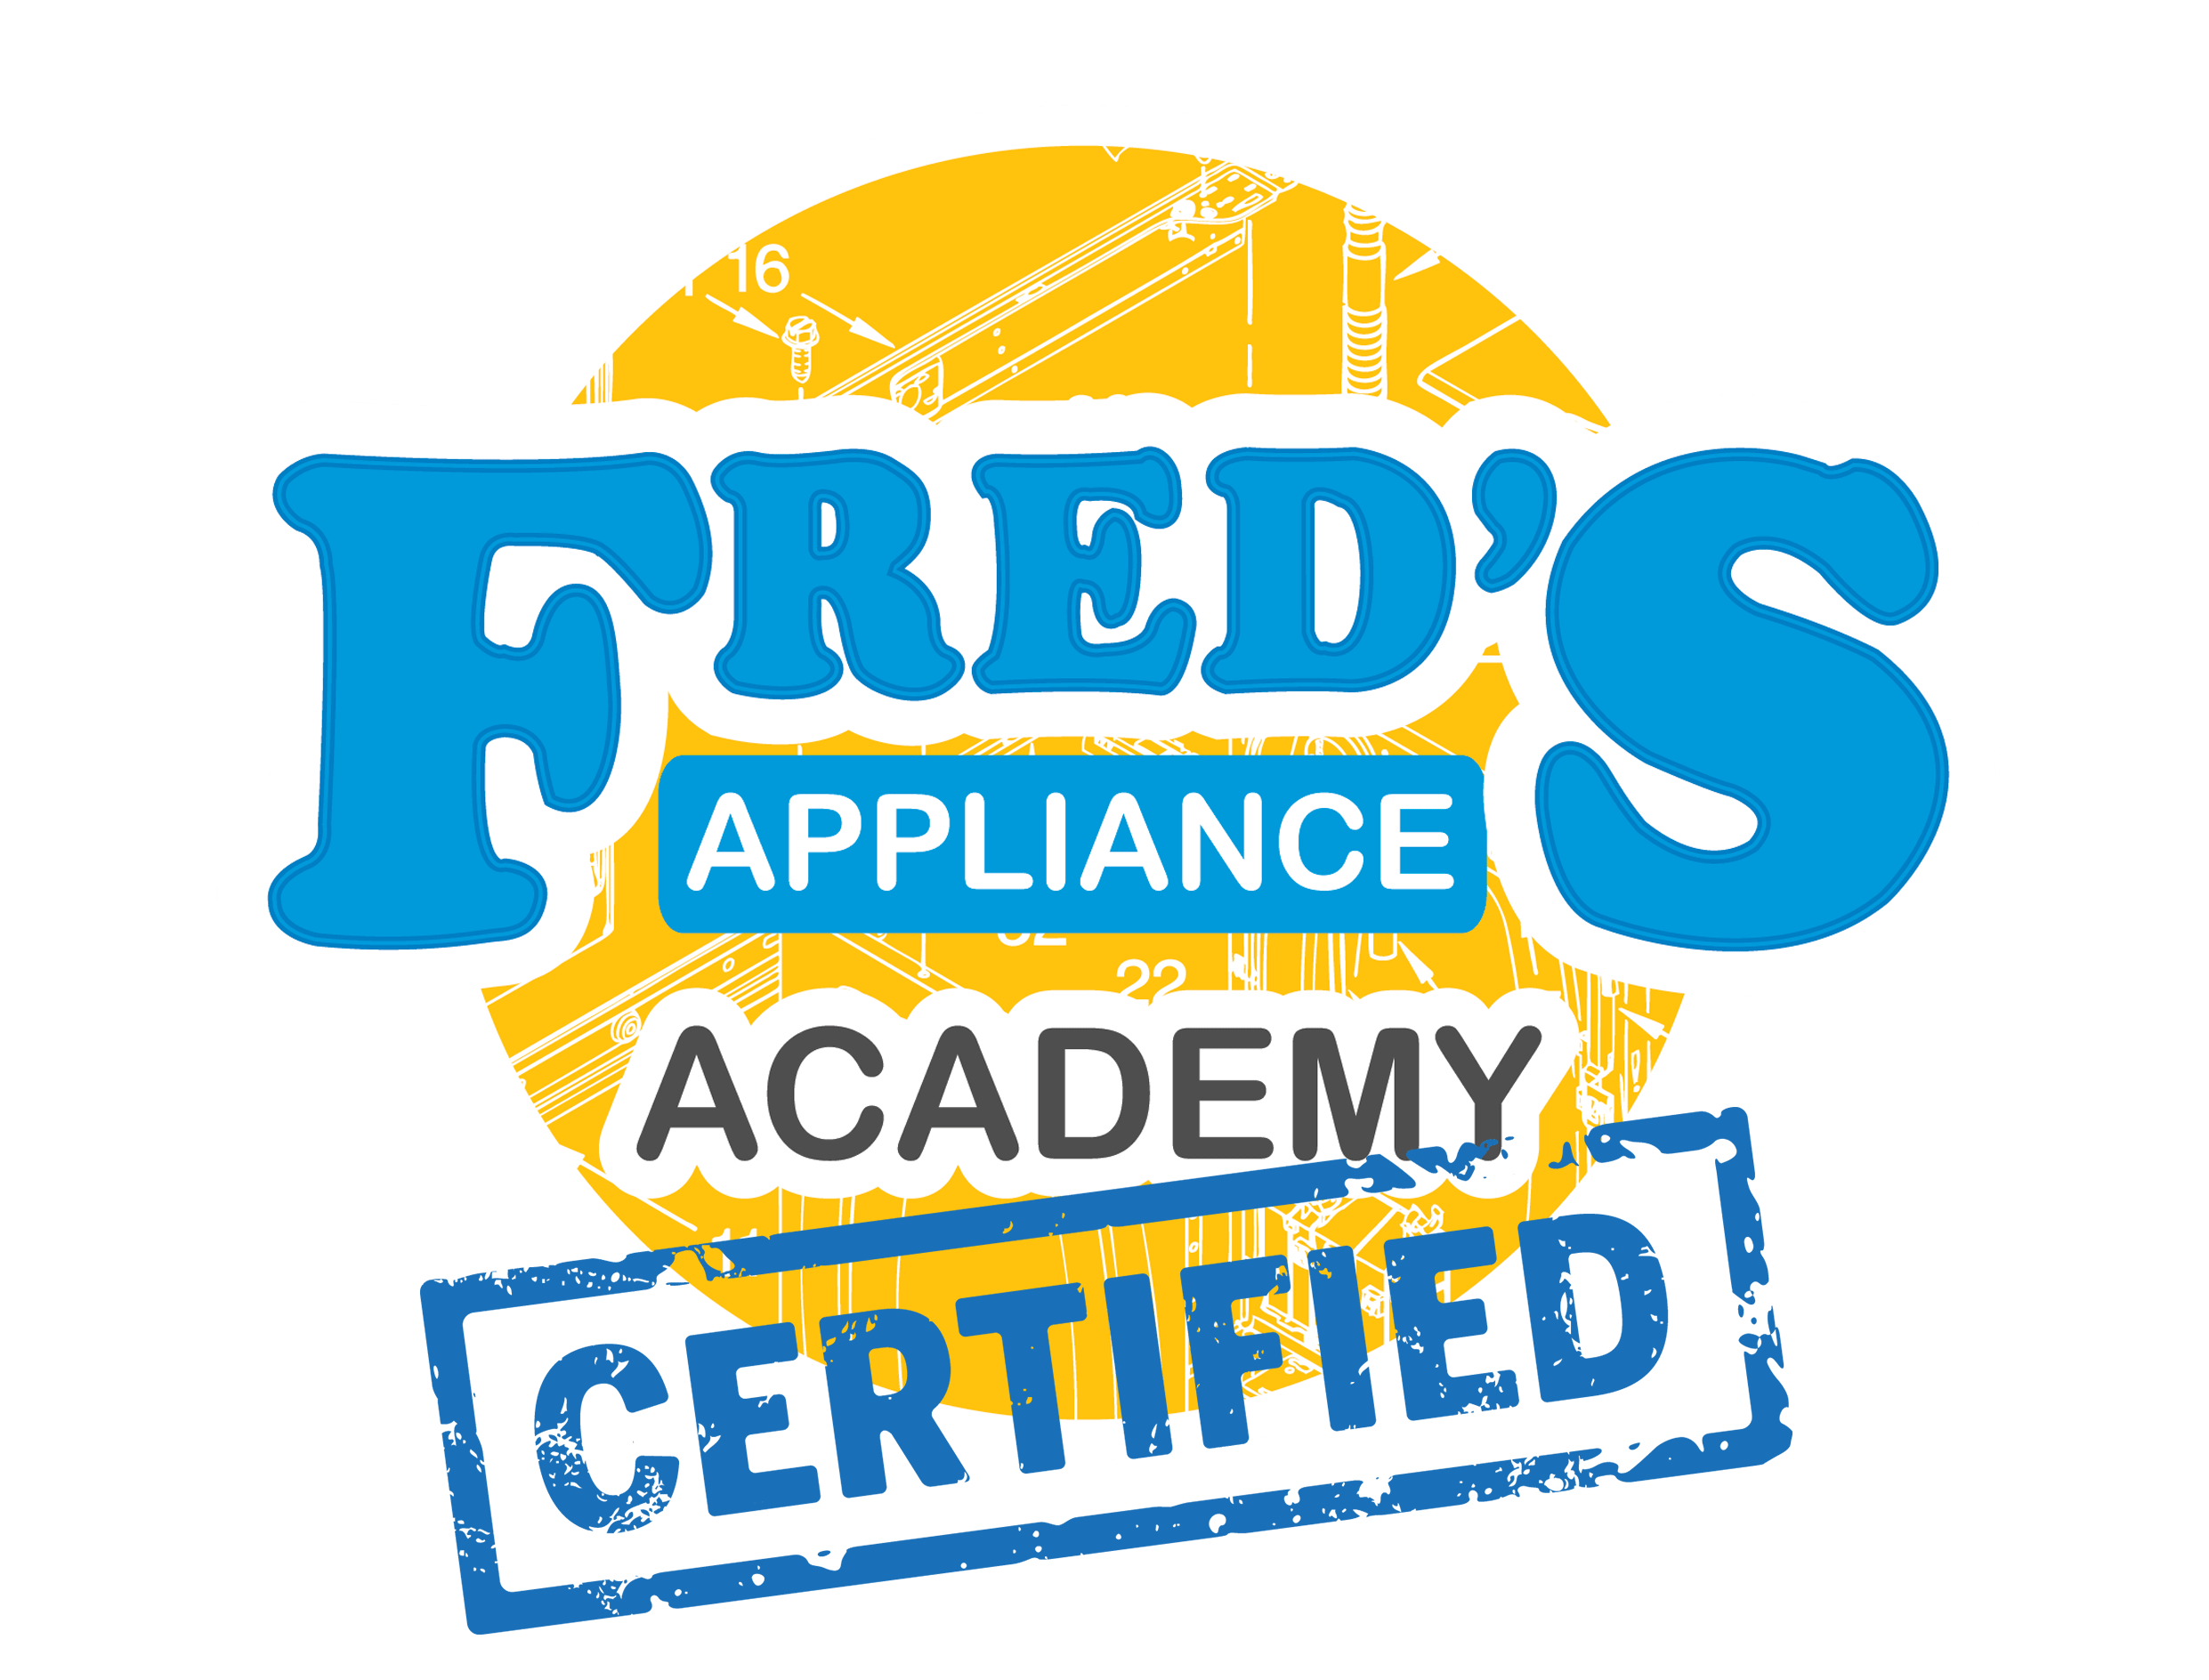 Fred's Appliance Academy